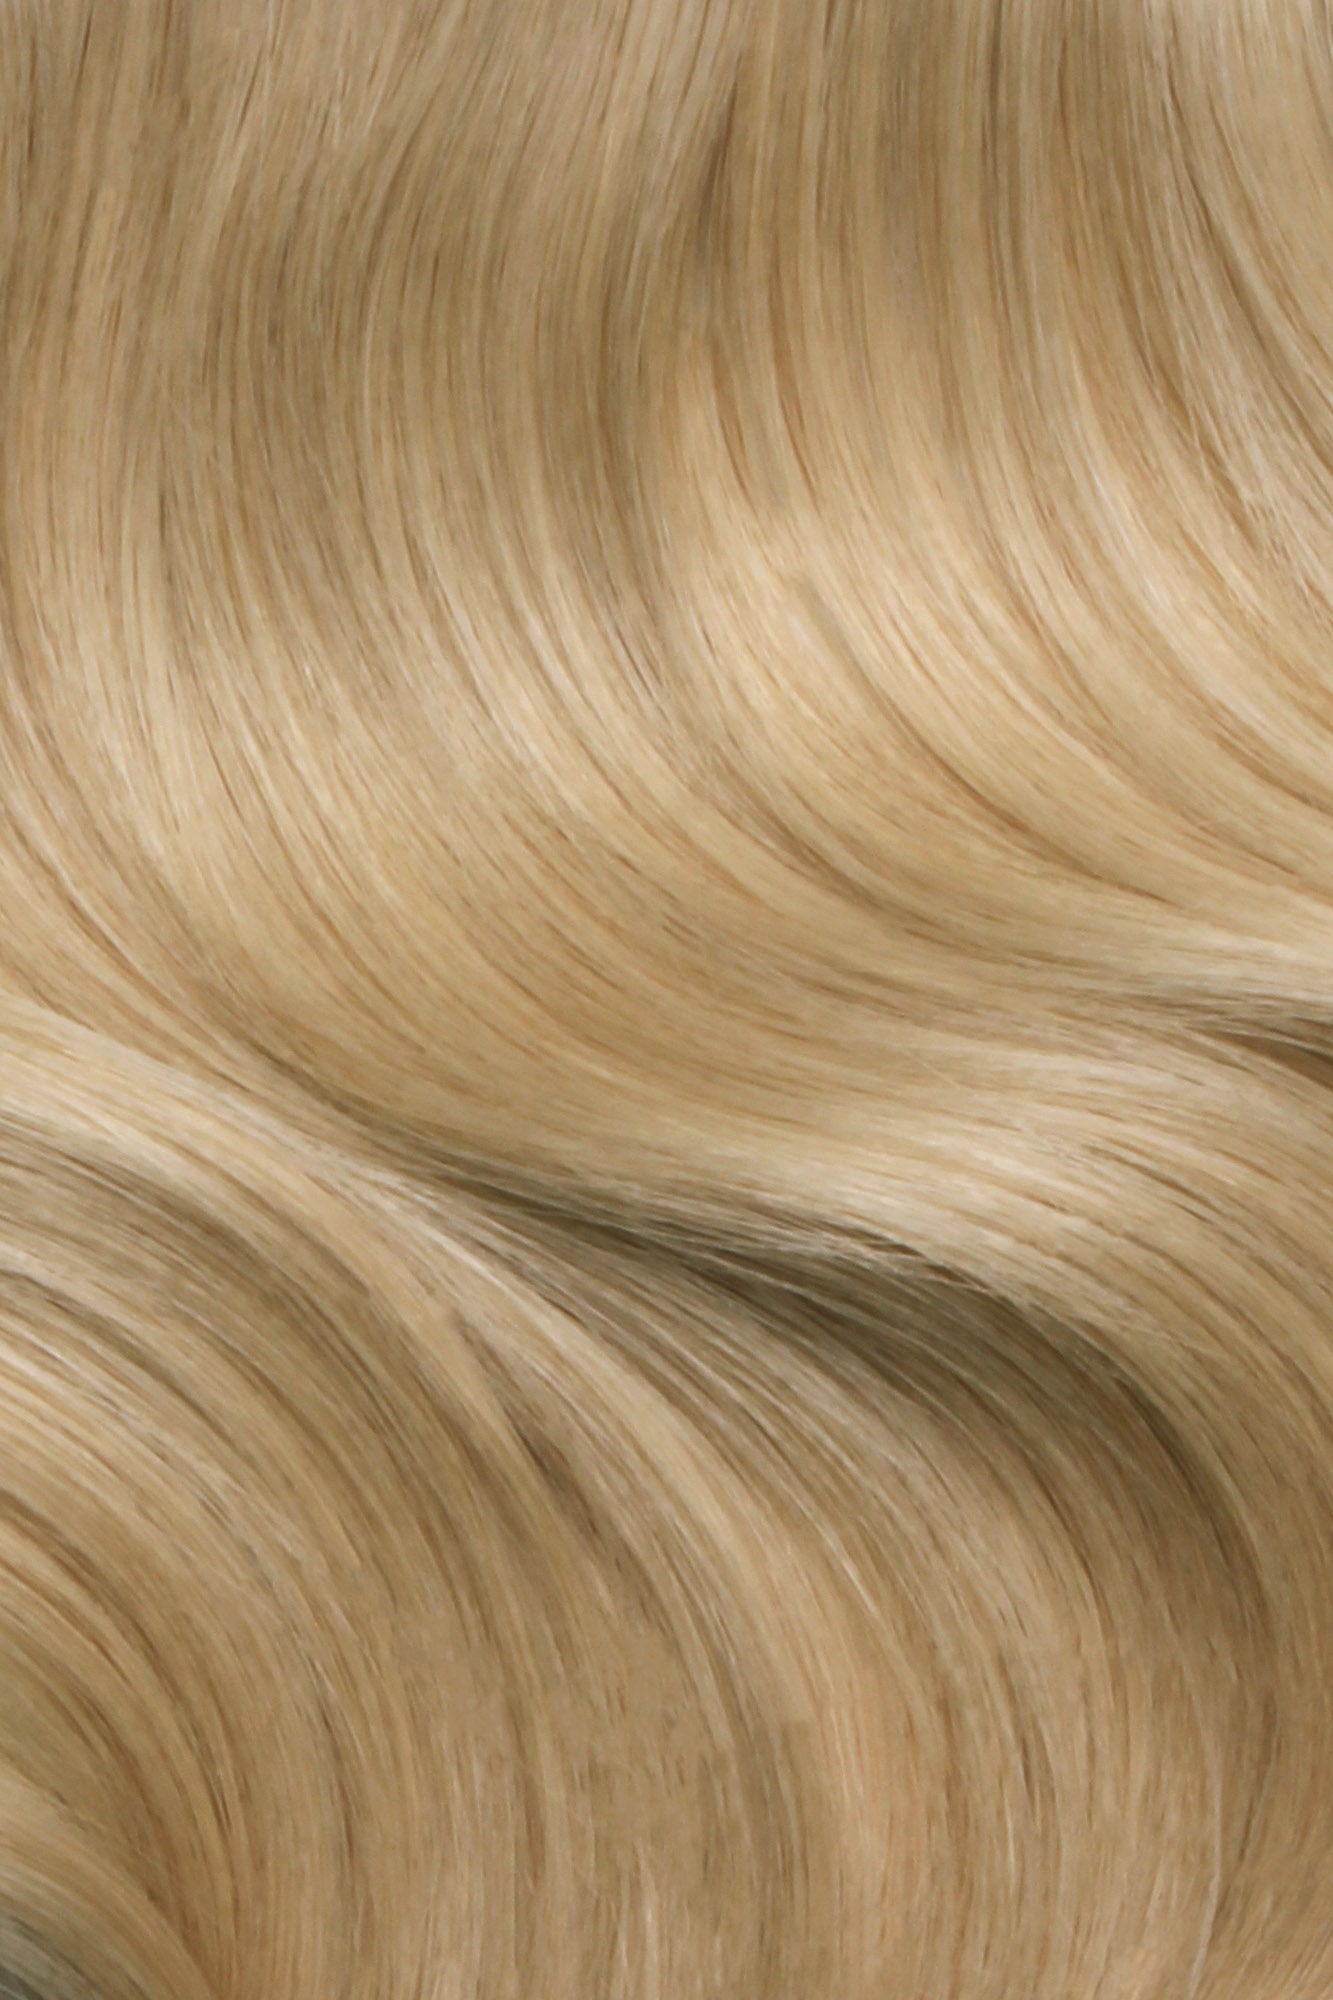 SEAMLESS® Flat Weft 16 Inches - SWAY Hair Extensions Beach-Ash-Blonde-9-613 Natural SEAMLESS® Flat Weft 16 Inches extensions. Thin, flexible, and discreet. 100% Double Drawn Remy Human Hair. Versatile and reusable